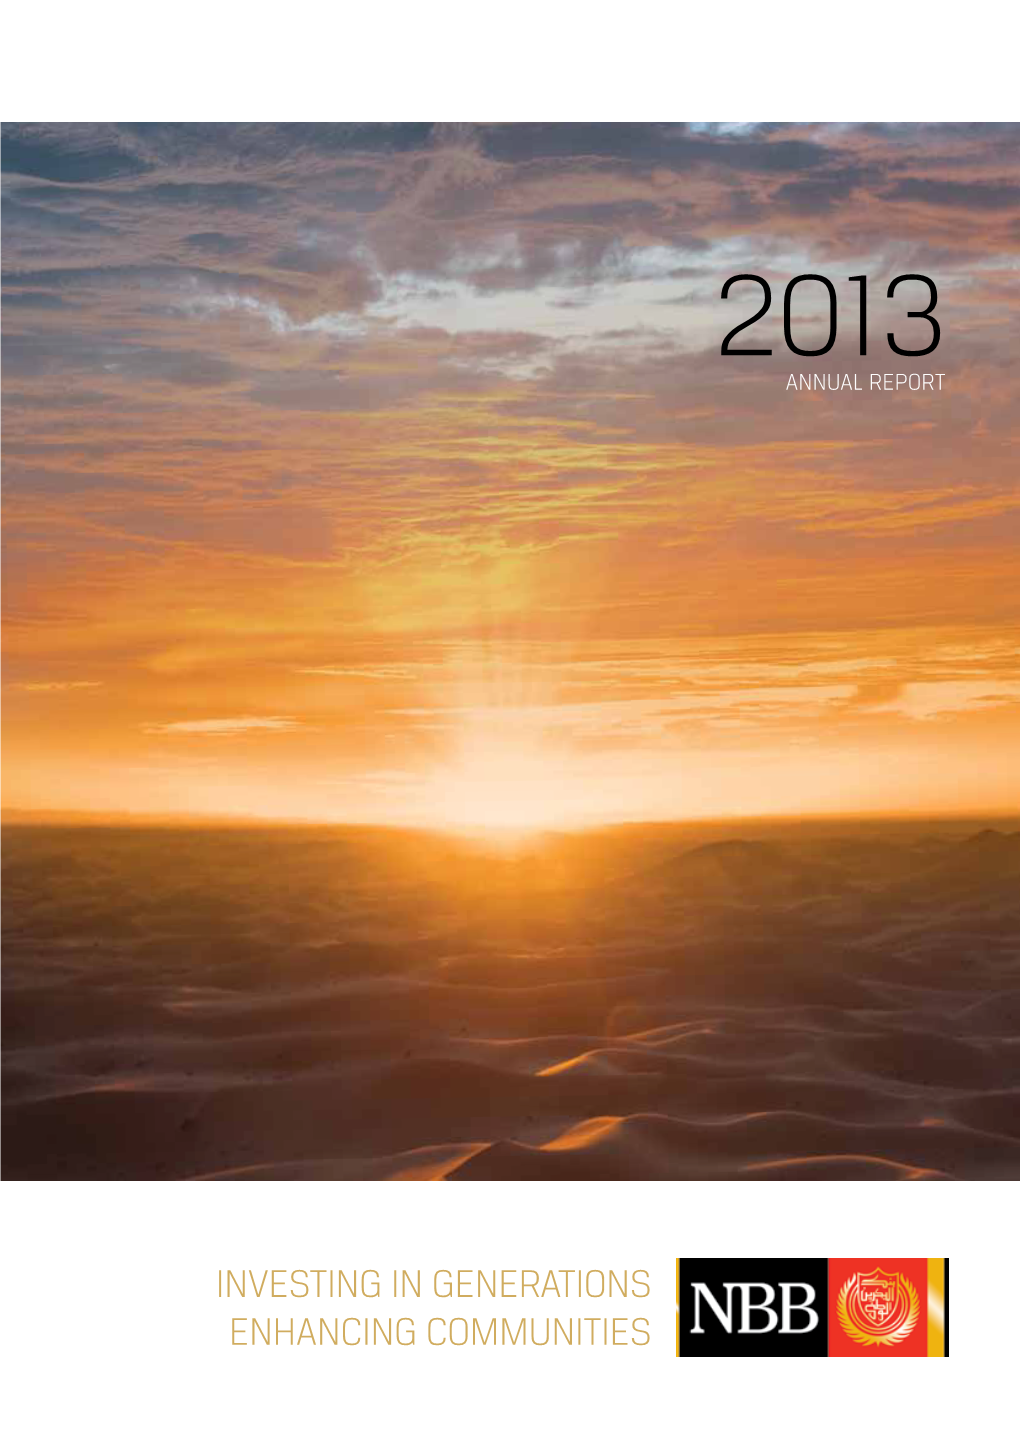 Annual Report 2013 Details: PDF File Size Is 1.95 MB